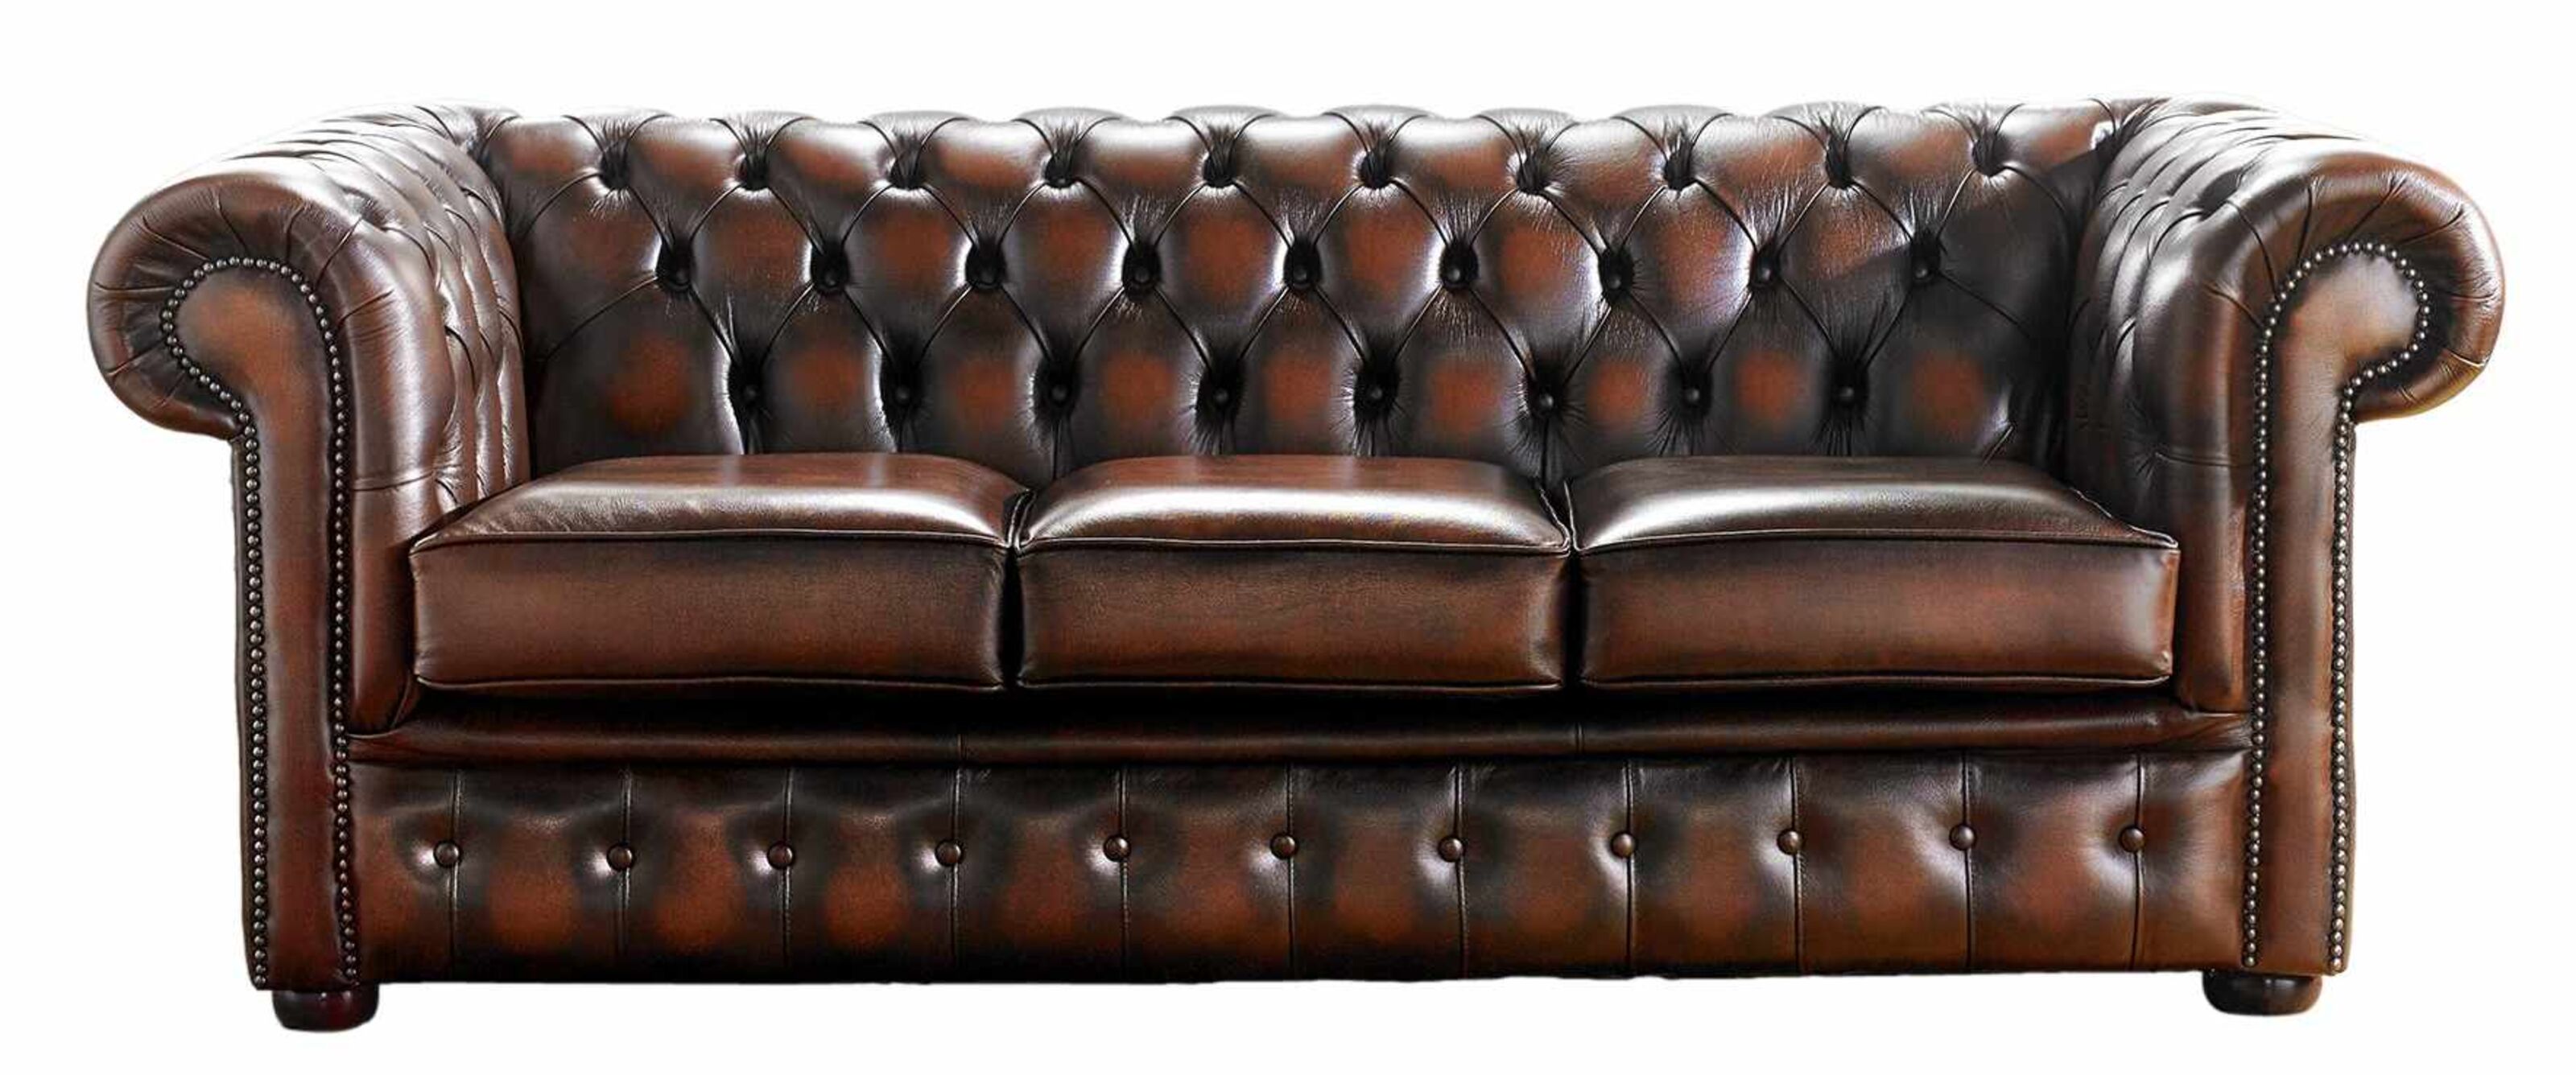 The Allure of Chesterfield Sofas in Hotel Furnishing  %Post Title